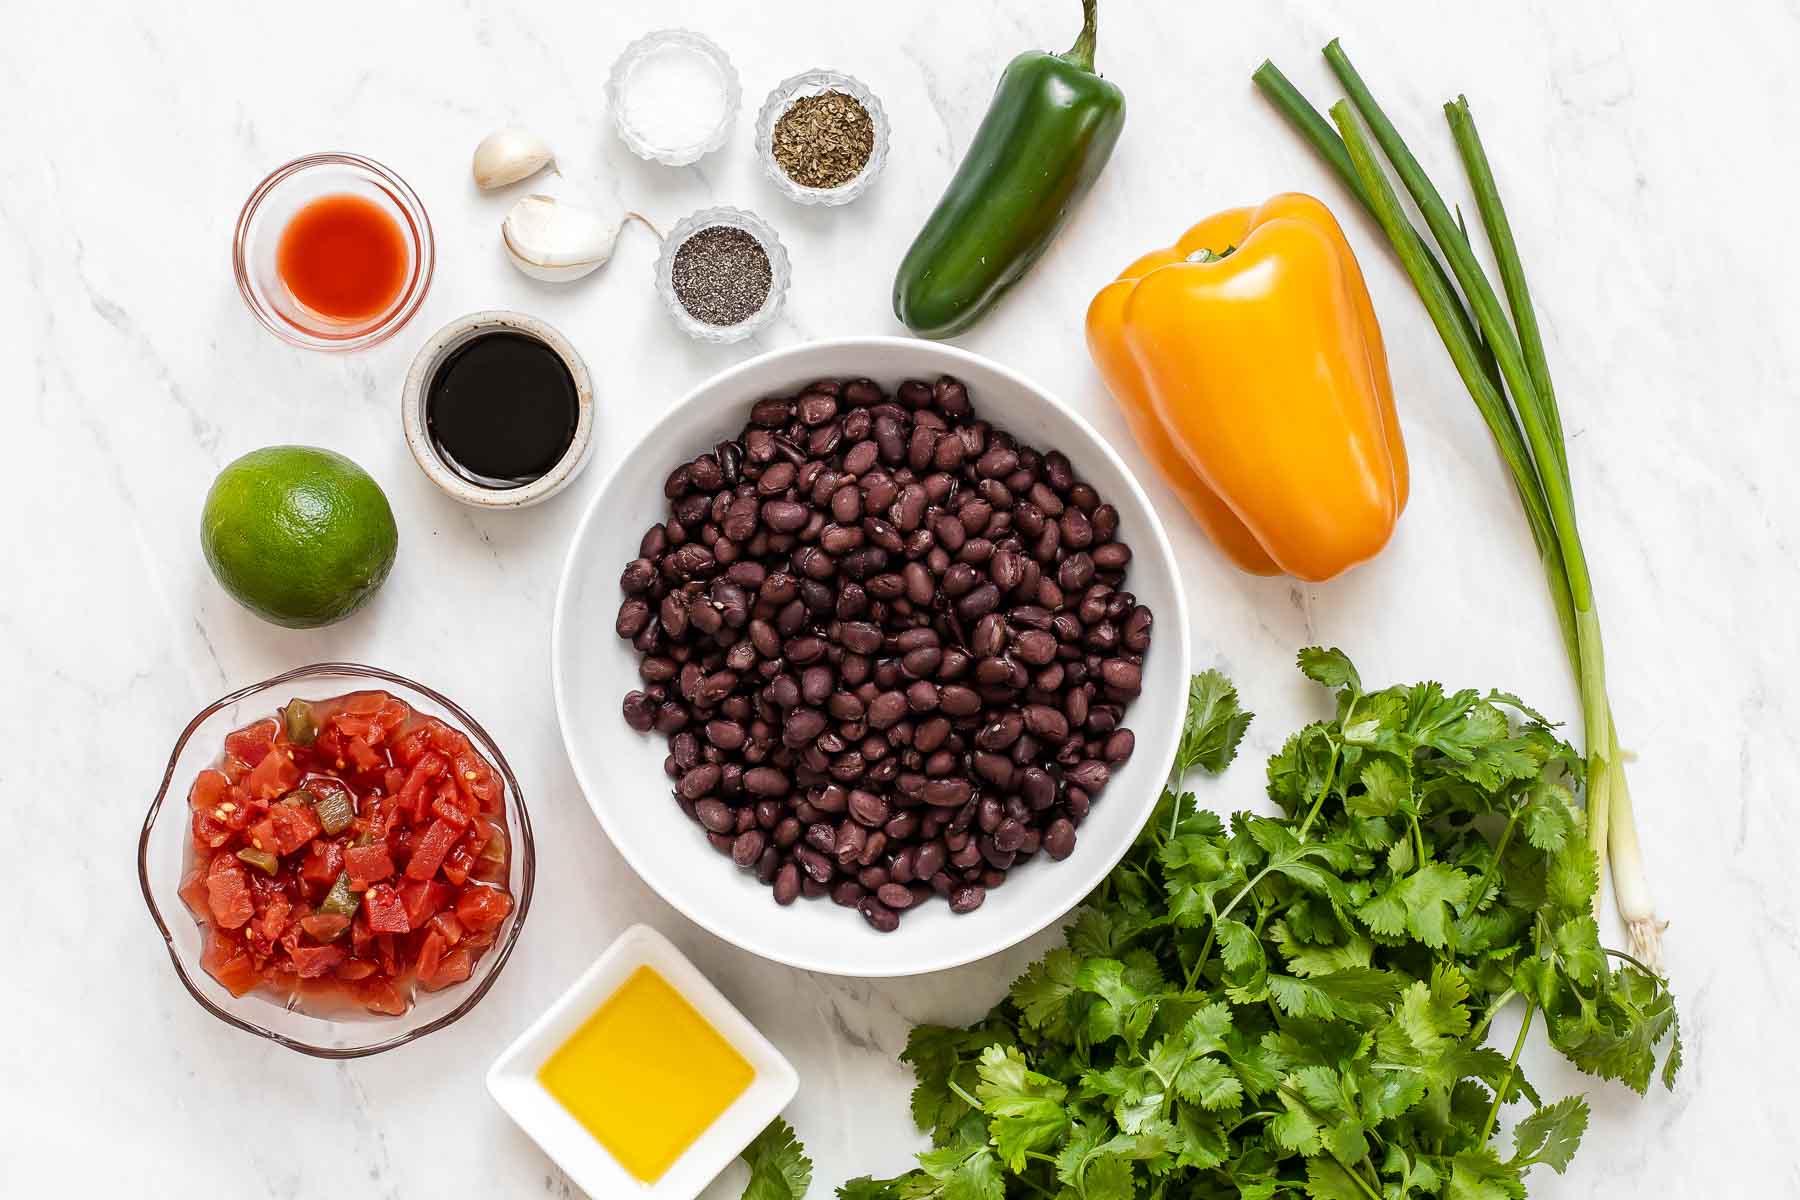 Ingredients for black bean salad in bowls on white surface.